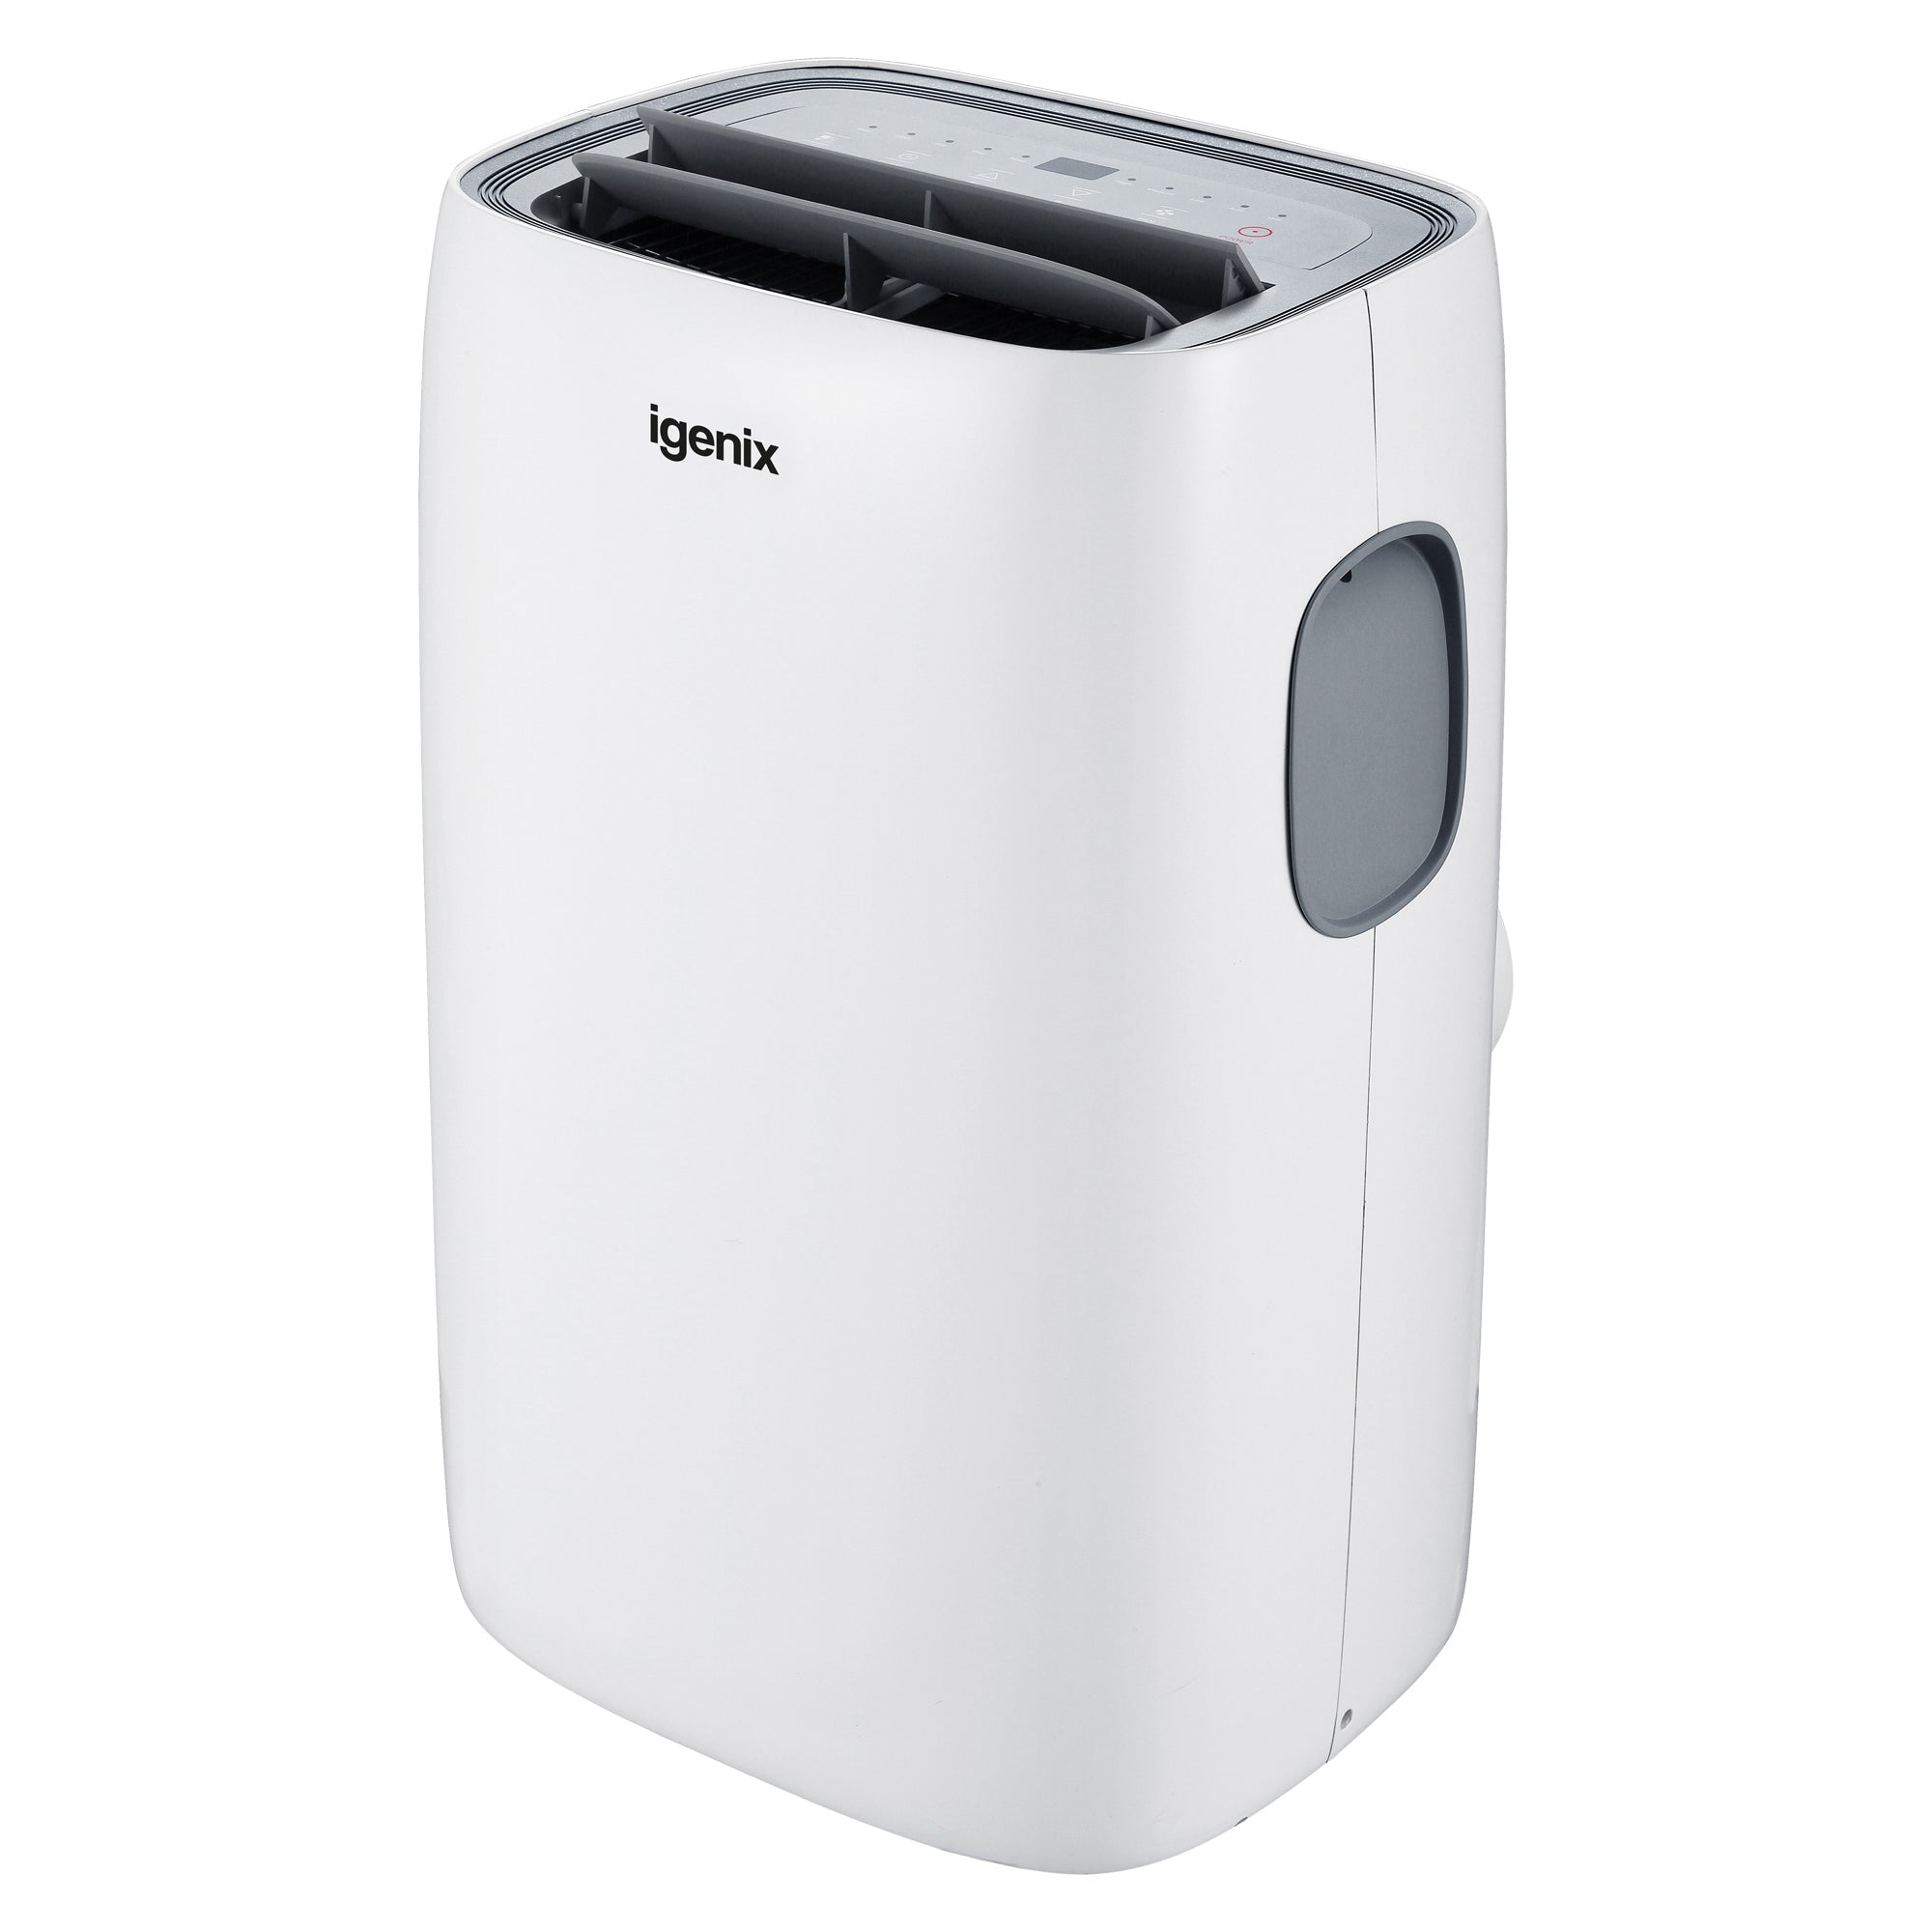 4-in-1 Portable Air Conditioner, Cooling, Heating & Dehumidifier, 12000 BTU